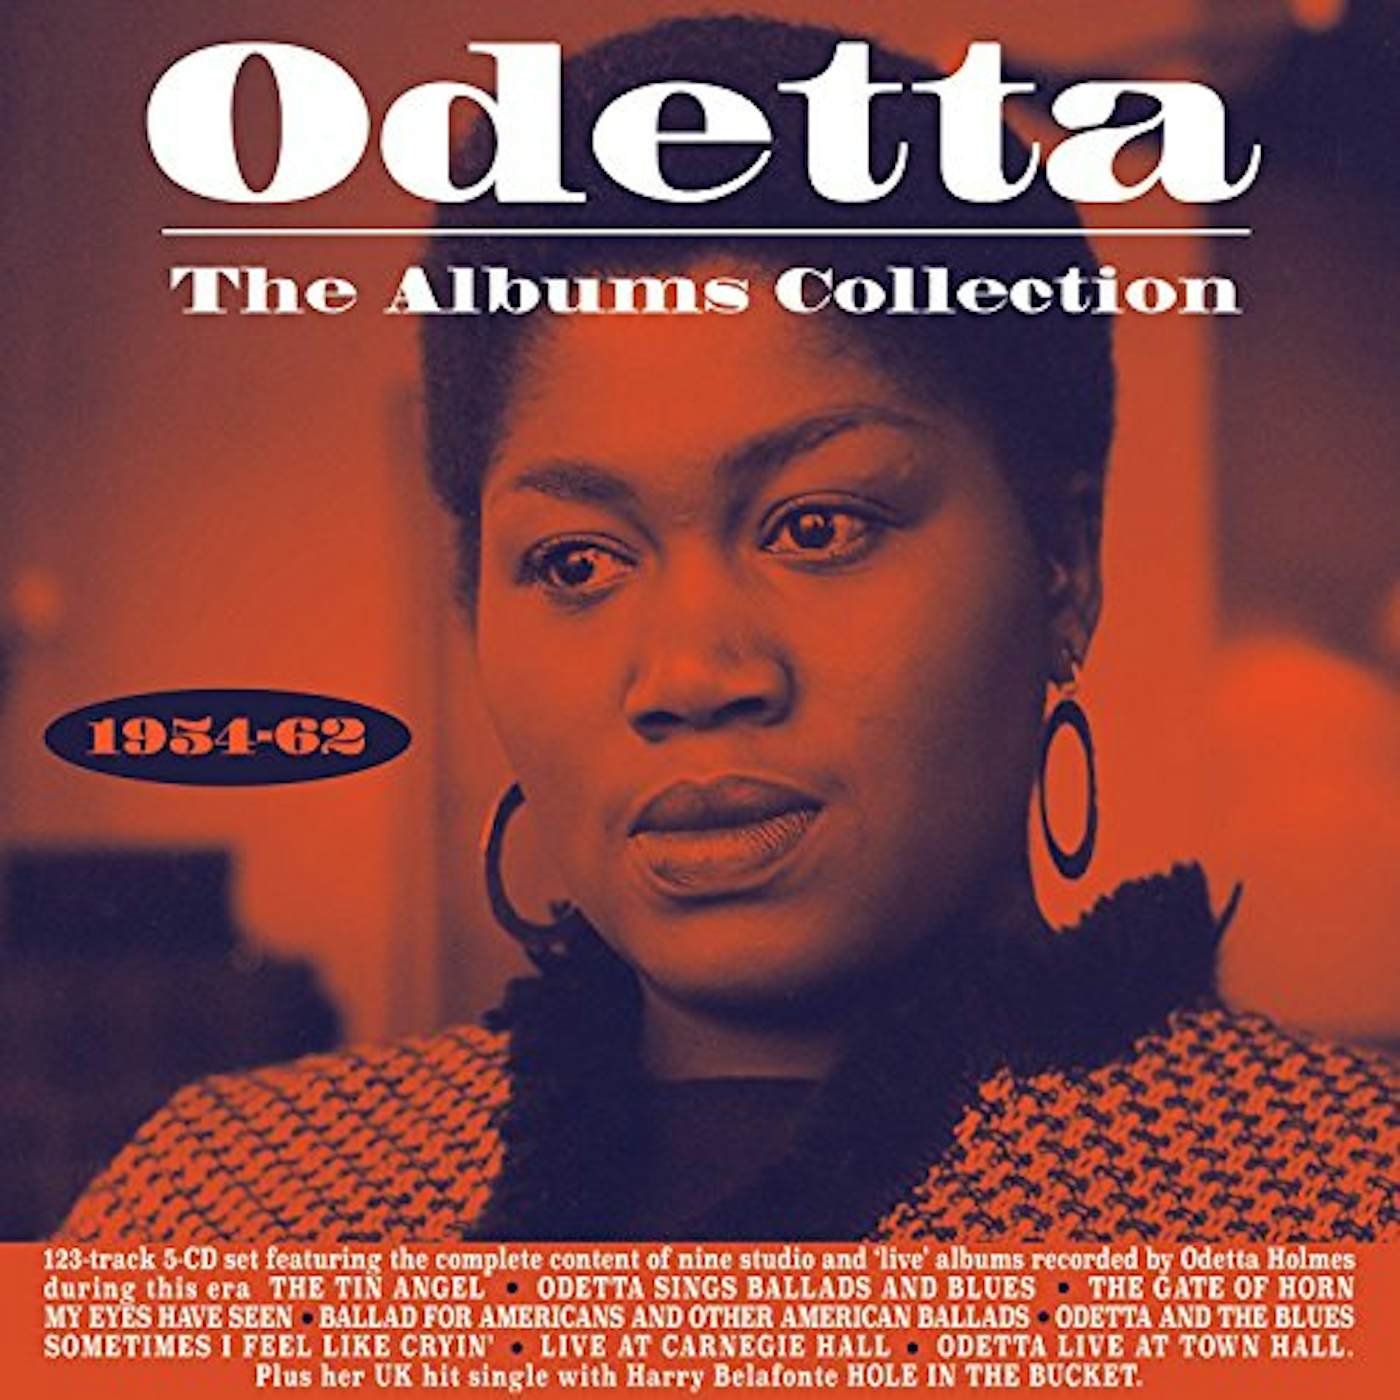 Odetta ALBUMS COLLECTION 1954-62 CD